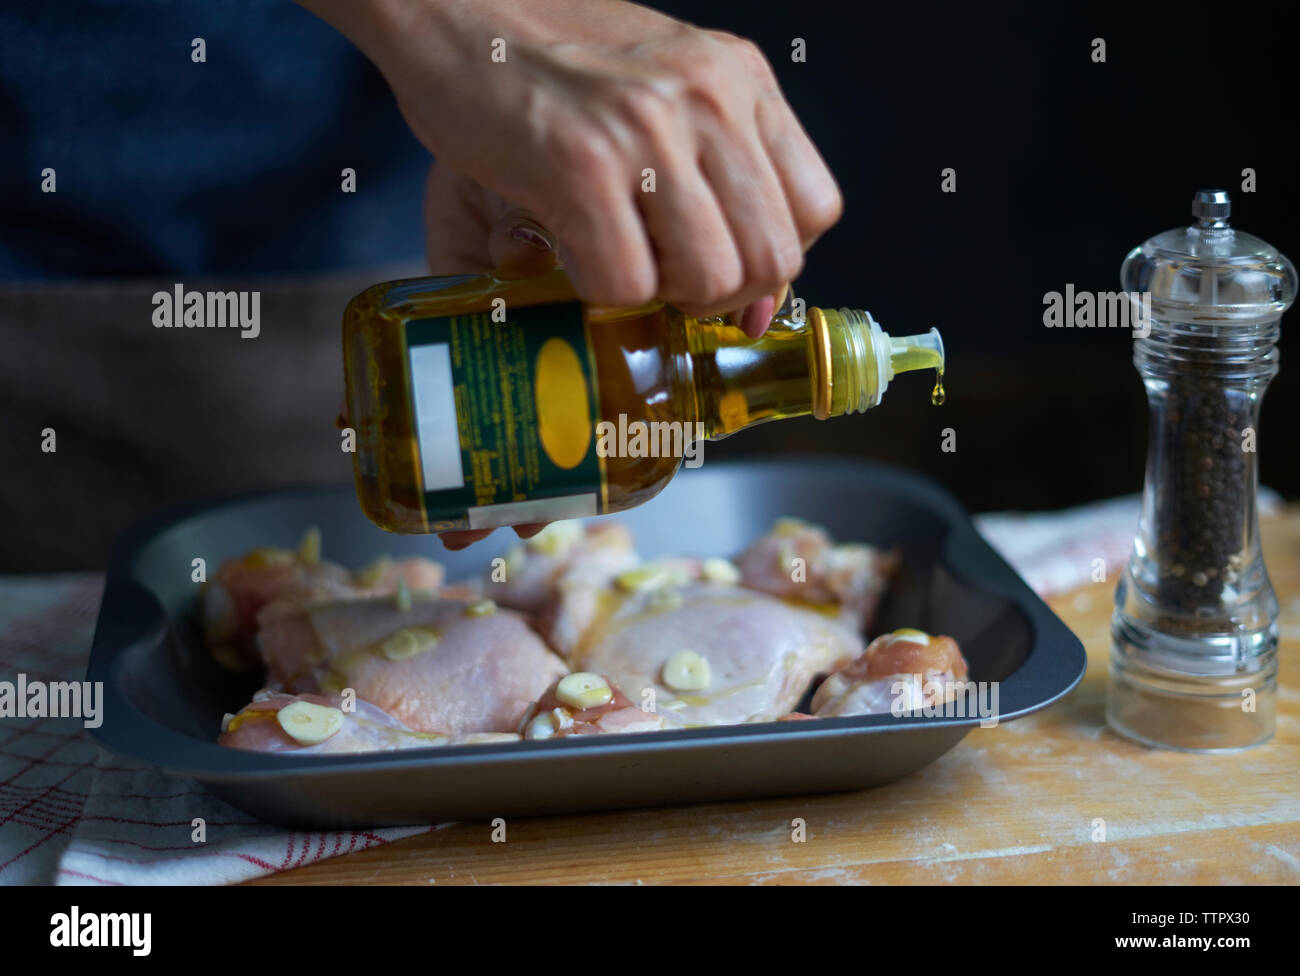 Midsection of woman pouring olive oil on chicken meat in tray Stock Photo